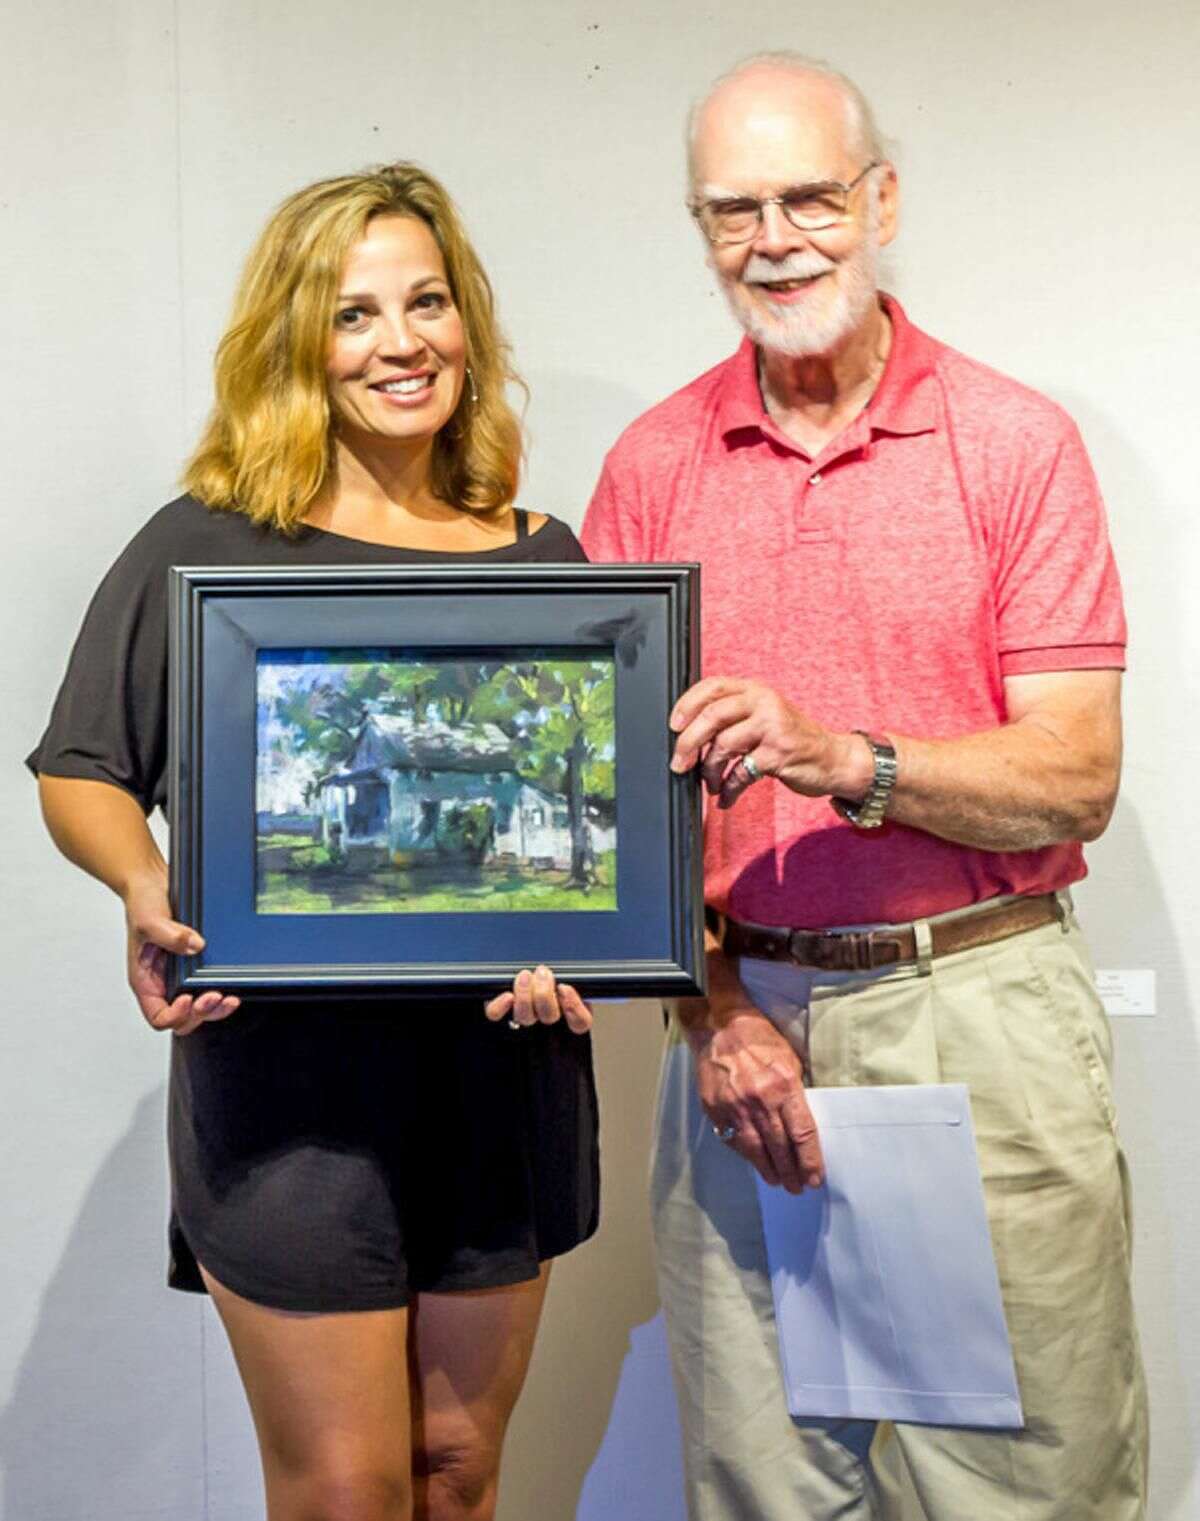 Show Chairman Clayton Buchanon Christine Vitarello receives the Frank Federico Award of Excellence in Pastel for her Pastel titled ?“Nutmeg House.?” The award is being presented by Show Chair Clayton Buchanan.